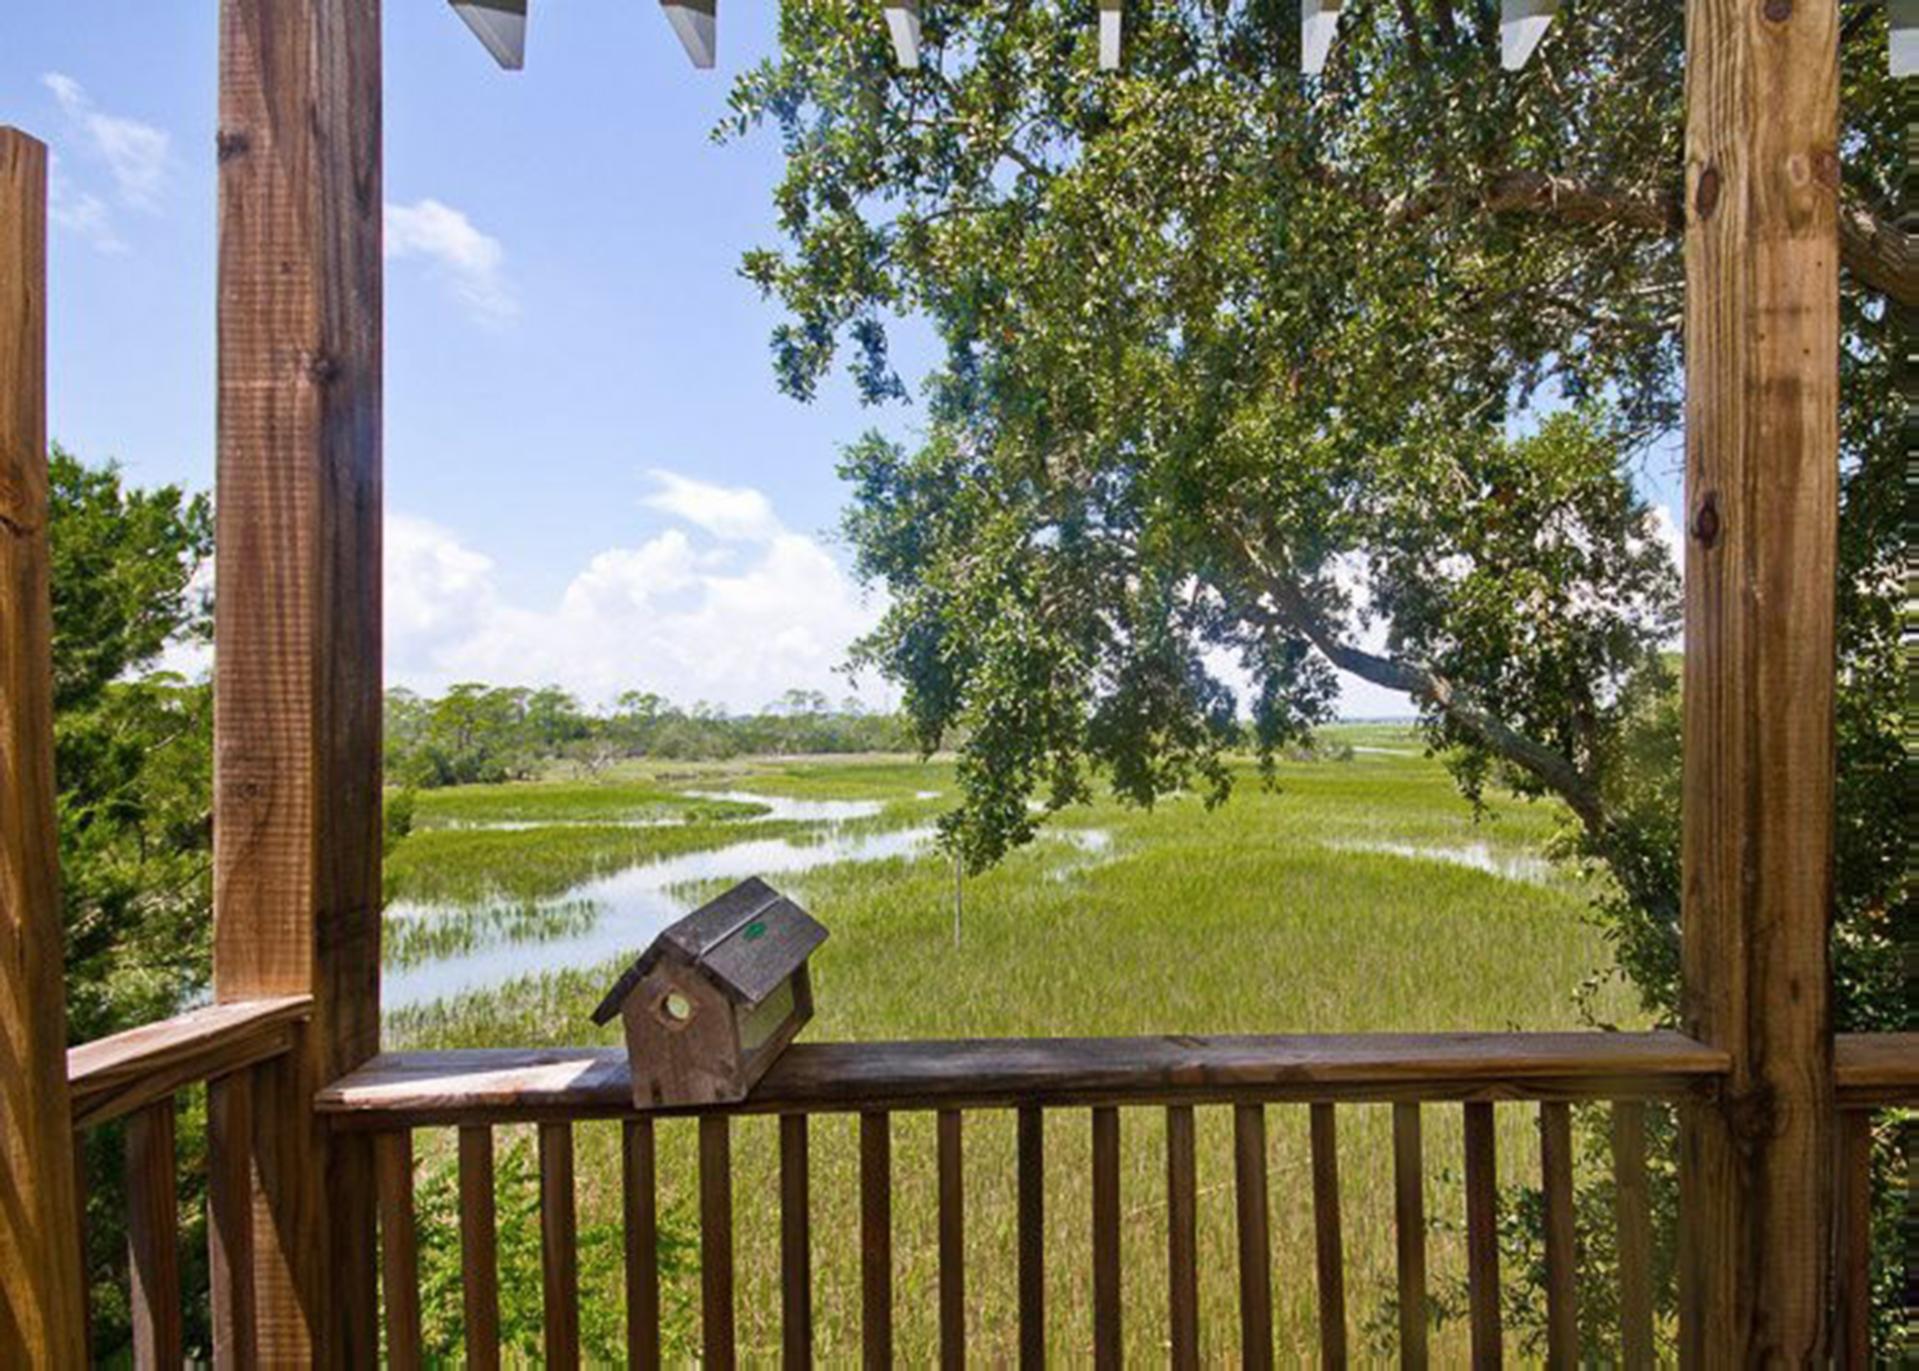  Enjoy watching the birds just over the marsh from the comfort of your private deck.